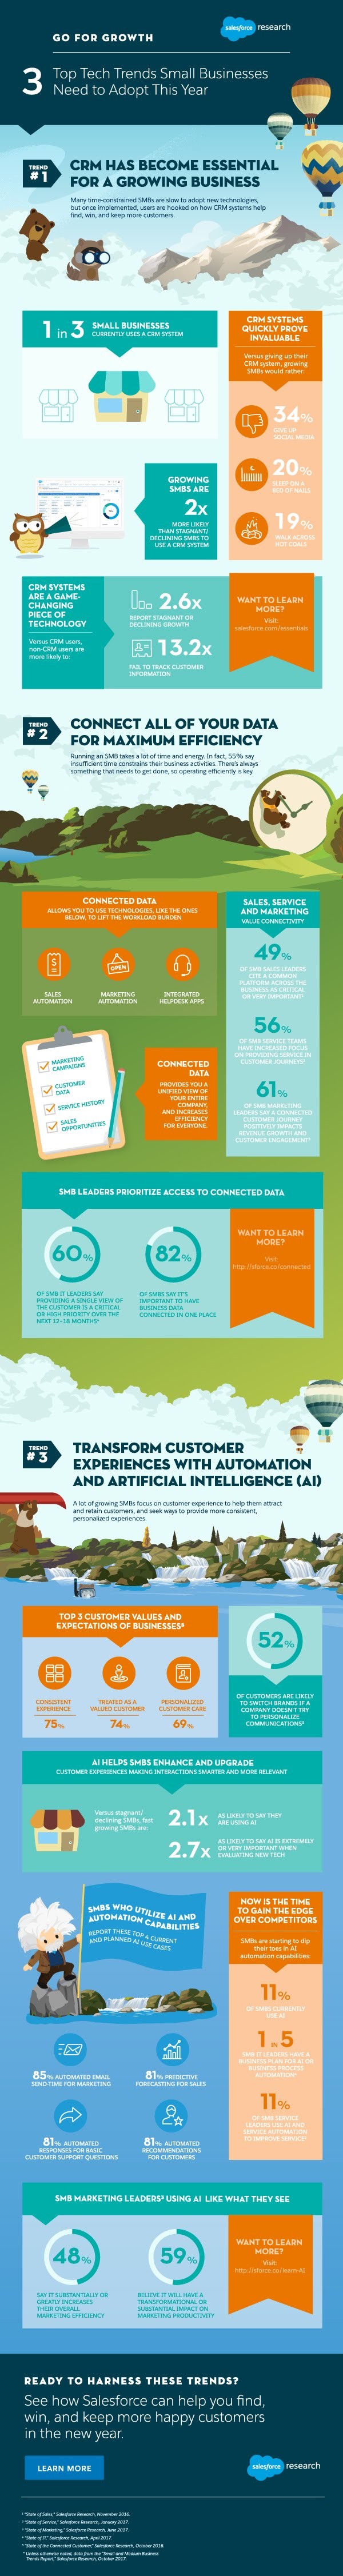 3 top tech trends info 3 Top Tech Trends Small Businesses Need to Adopt This Year [Infographic]